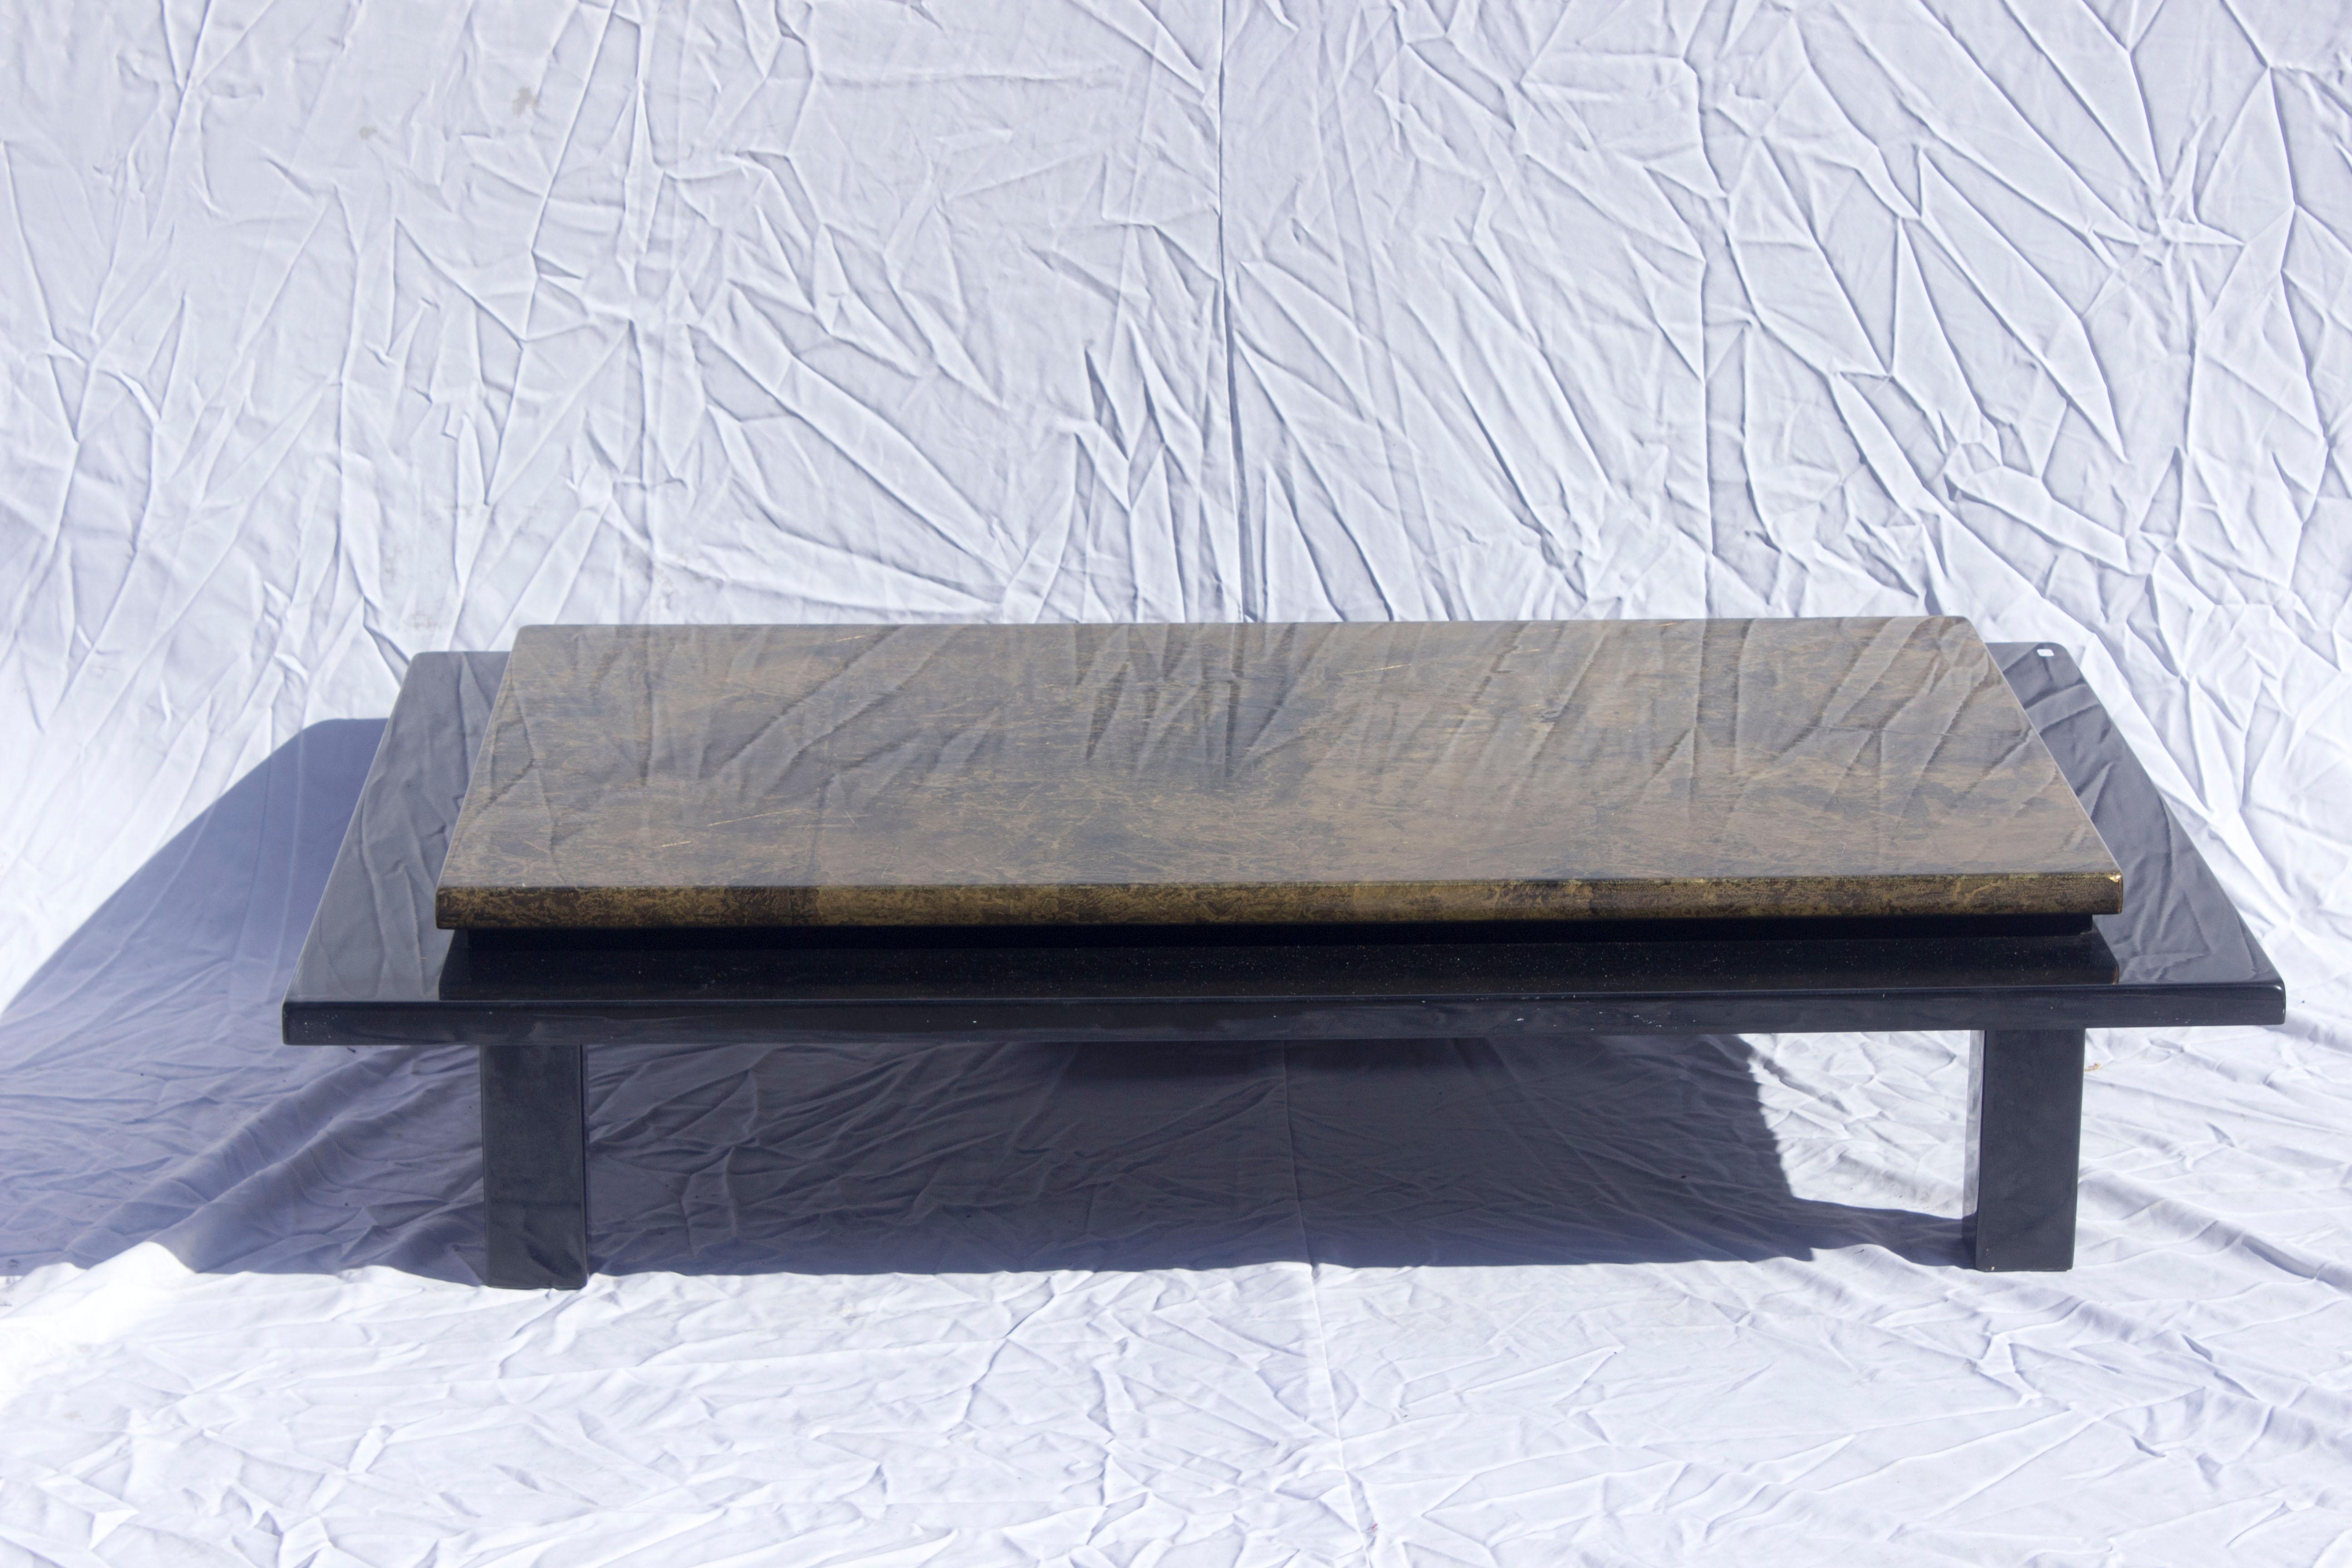 Superb coffee table of a high quality finish (weight about 40 kg).
Excellent condition, no shocks, no chips.
The 4 legs and the first top (140 x 90) in black lacquered finish.
Second sheet (120 x 70) lacquered gold tinted goatskin finish